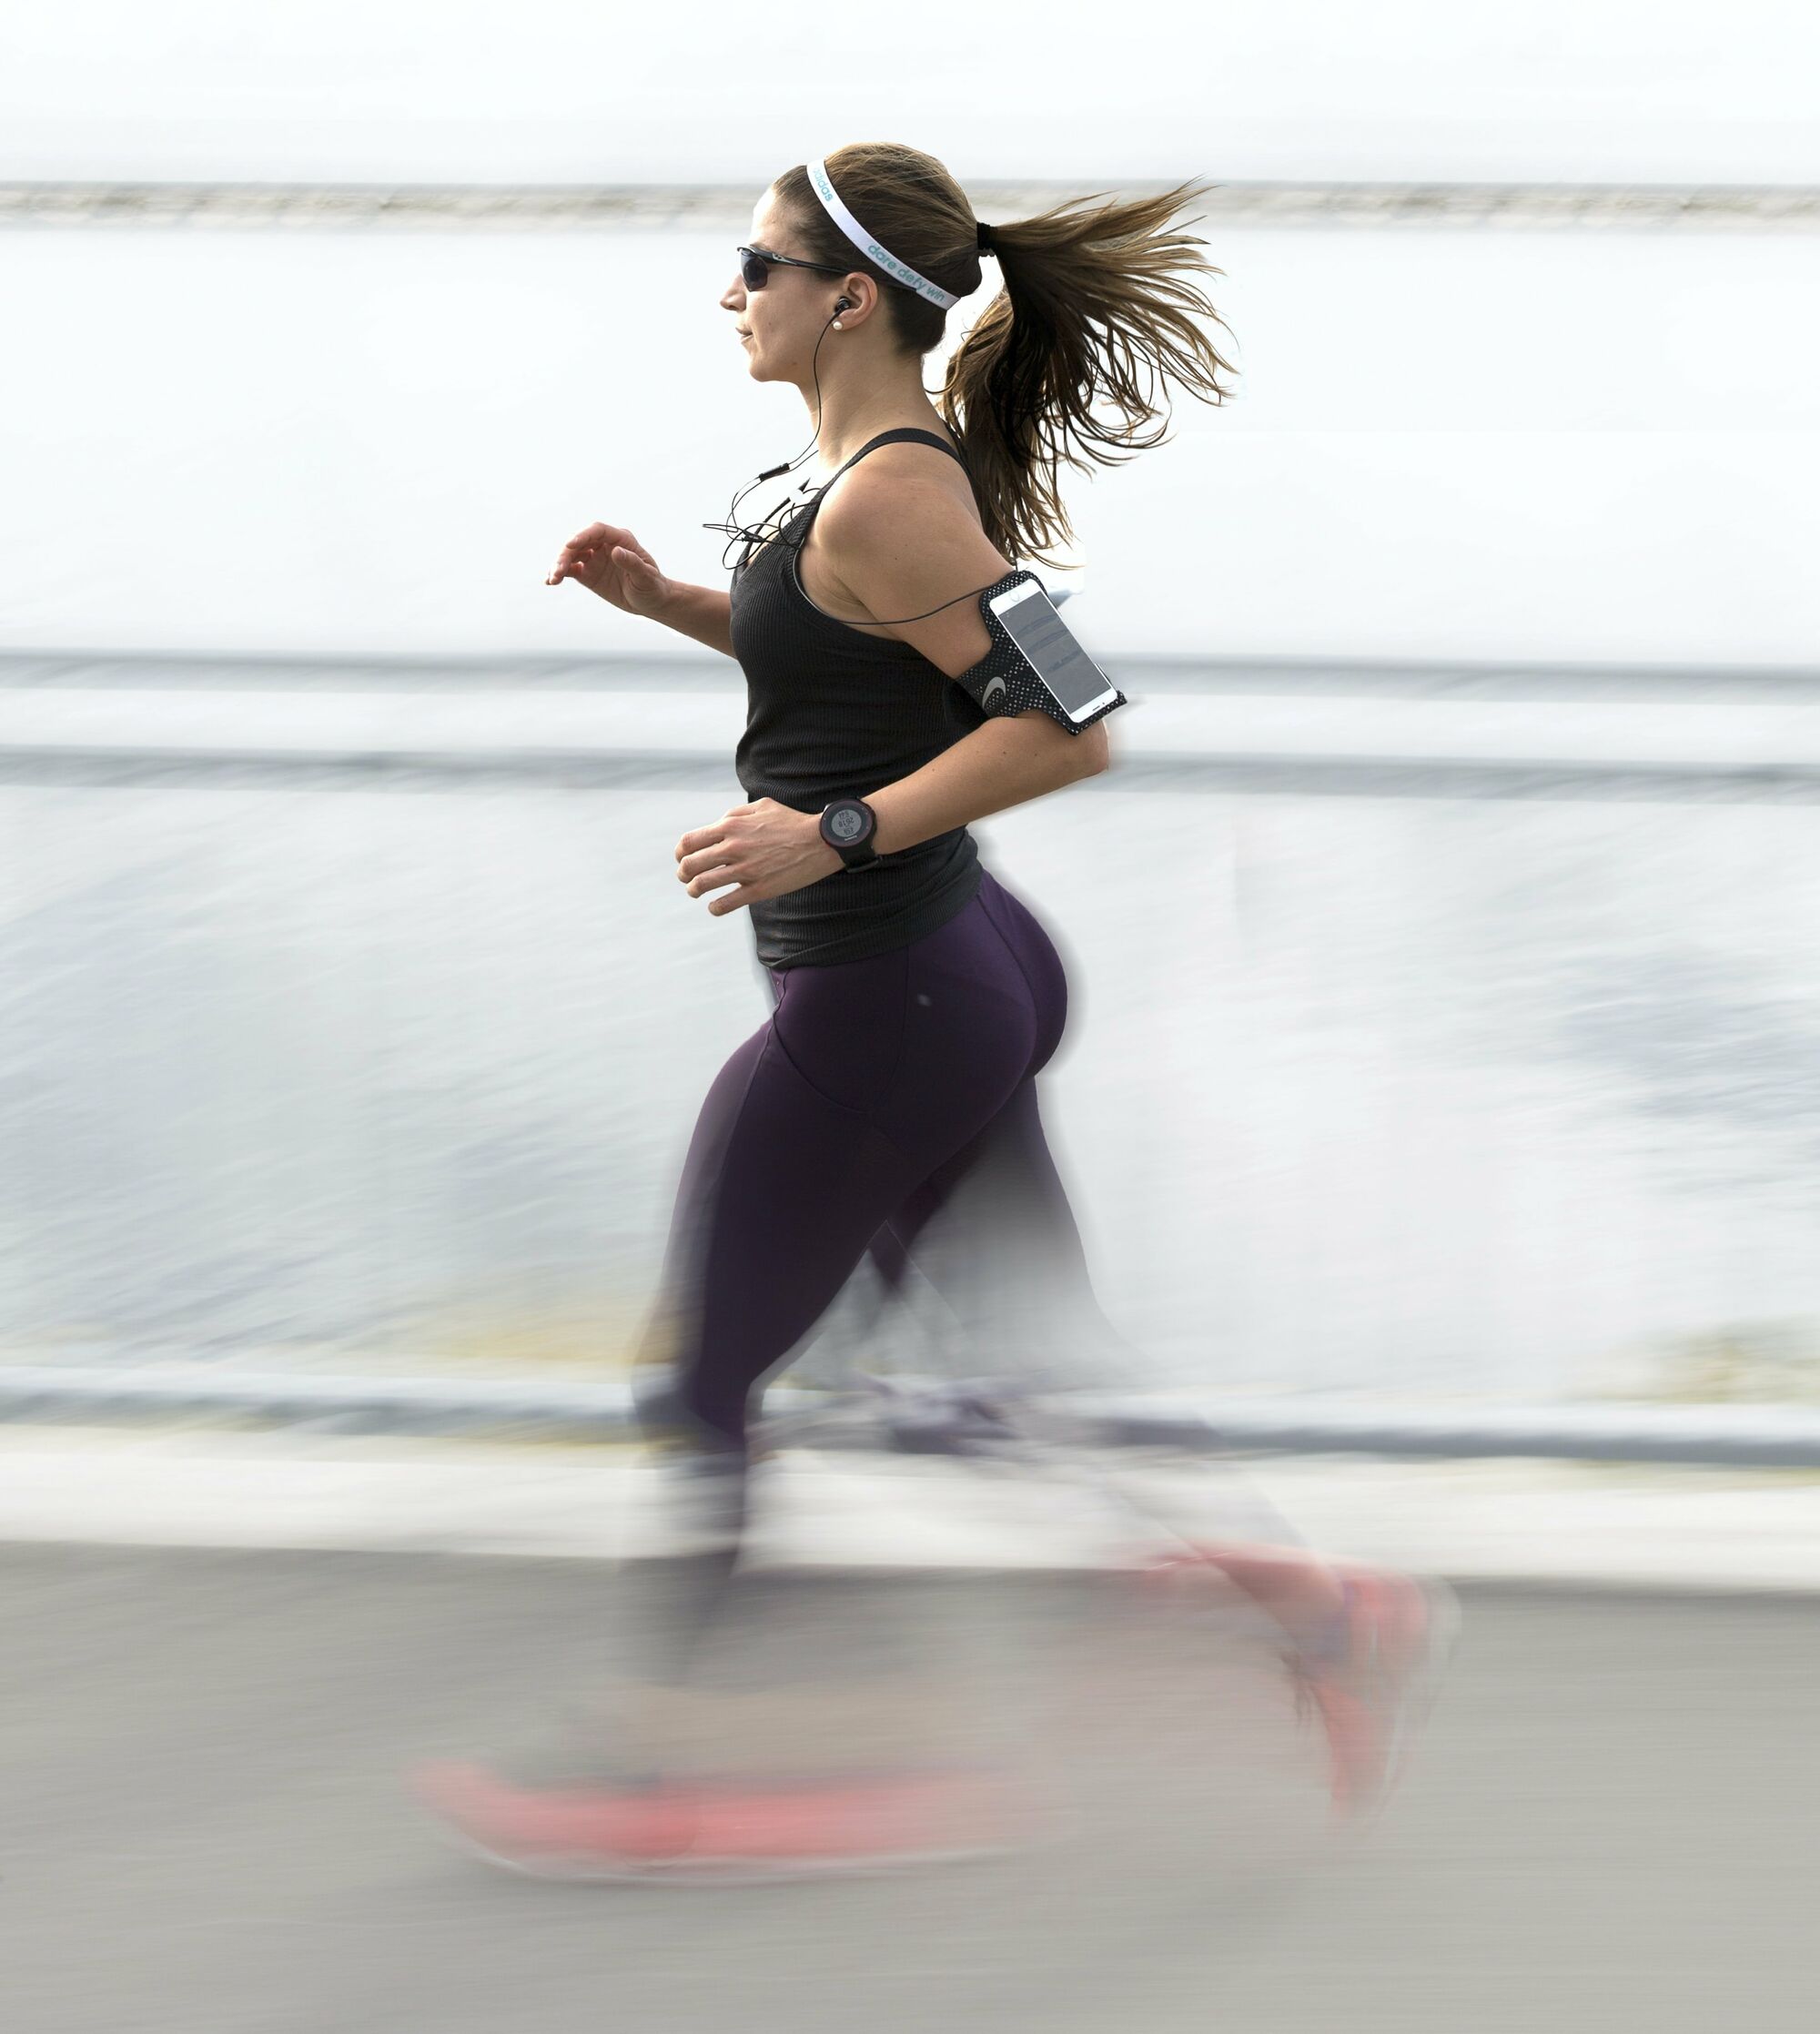 A runner wearing a gps device